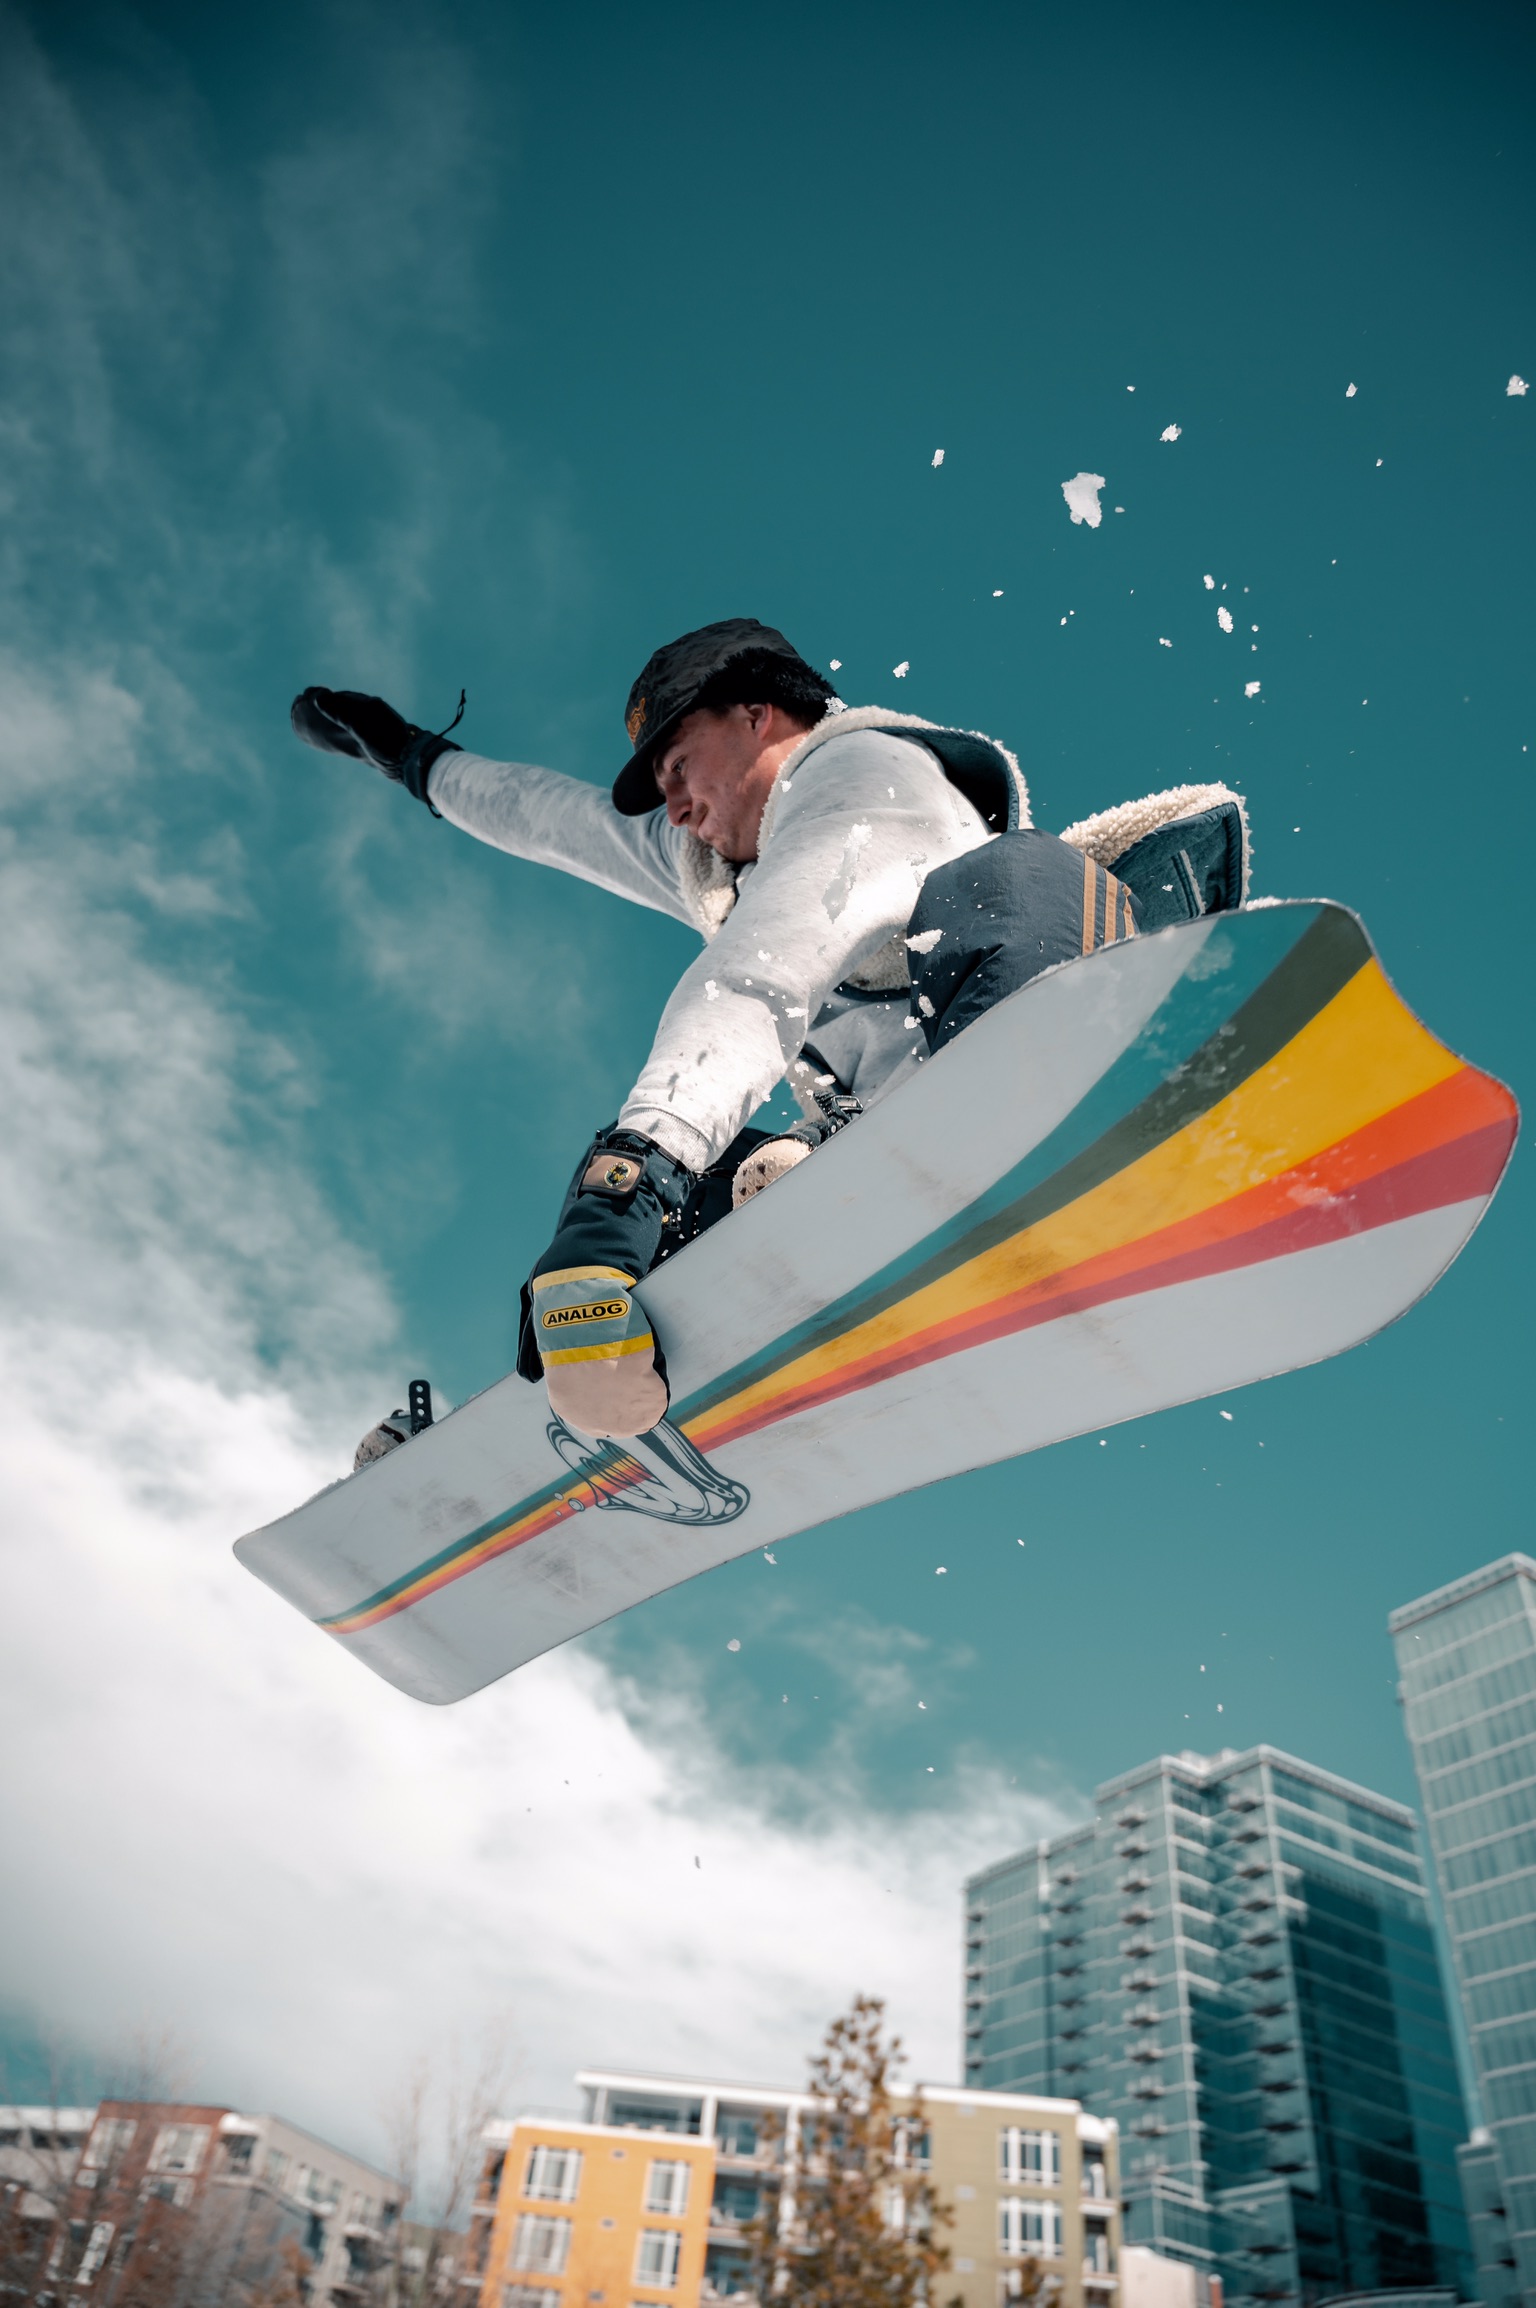 A person flying through the air on a white snowboard with multi-coloured stripes. There are tall city buildings in the background. A snow hill is not visible.